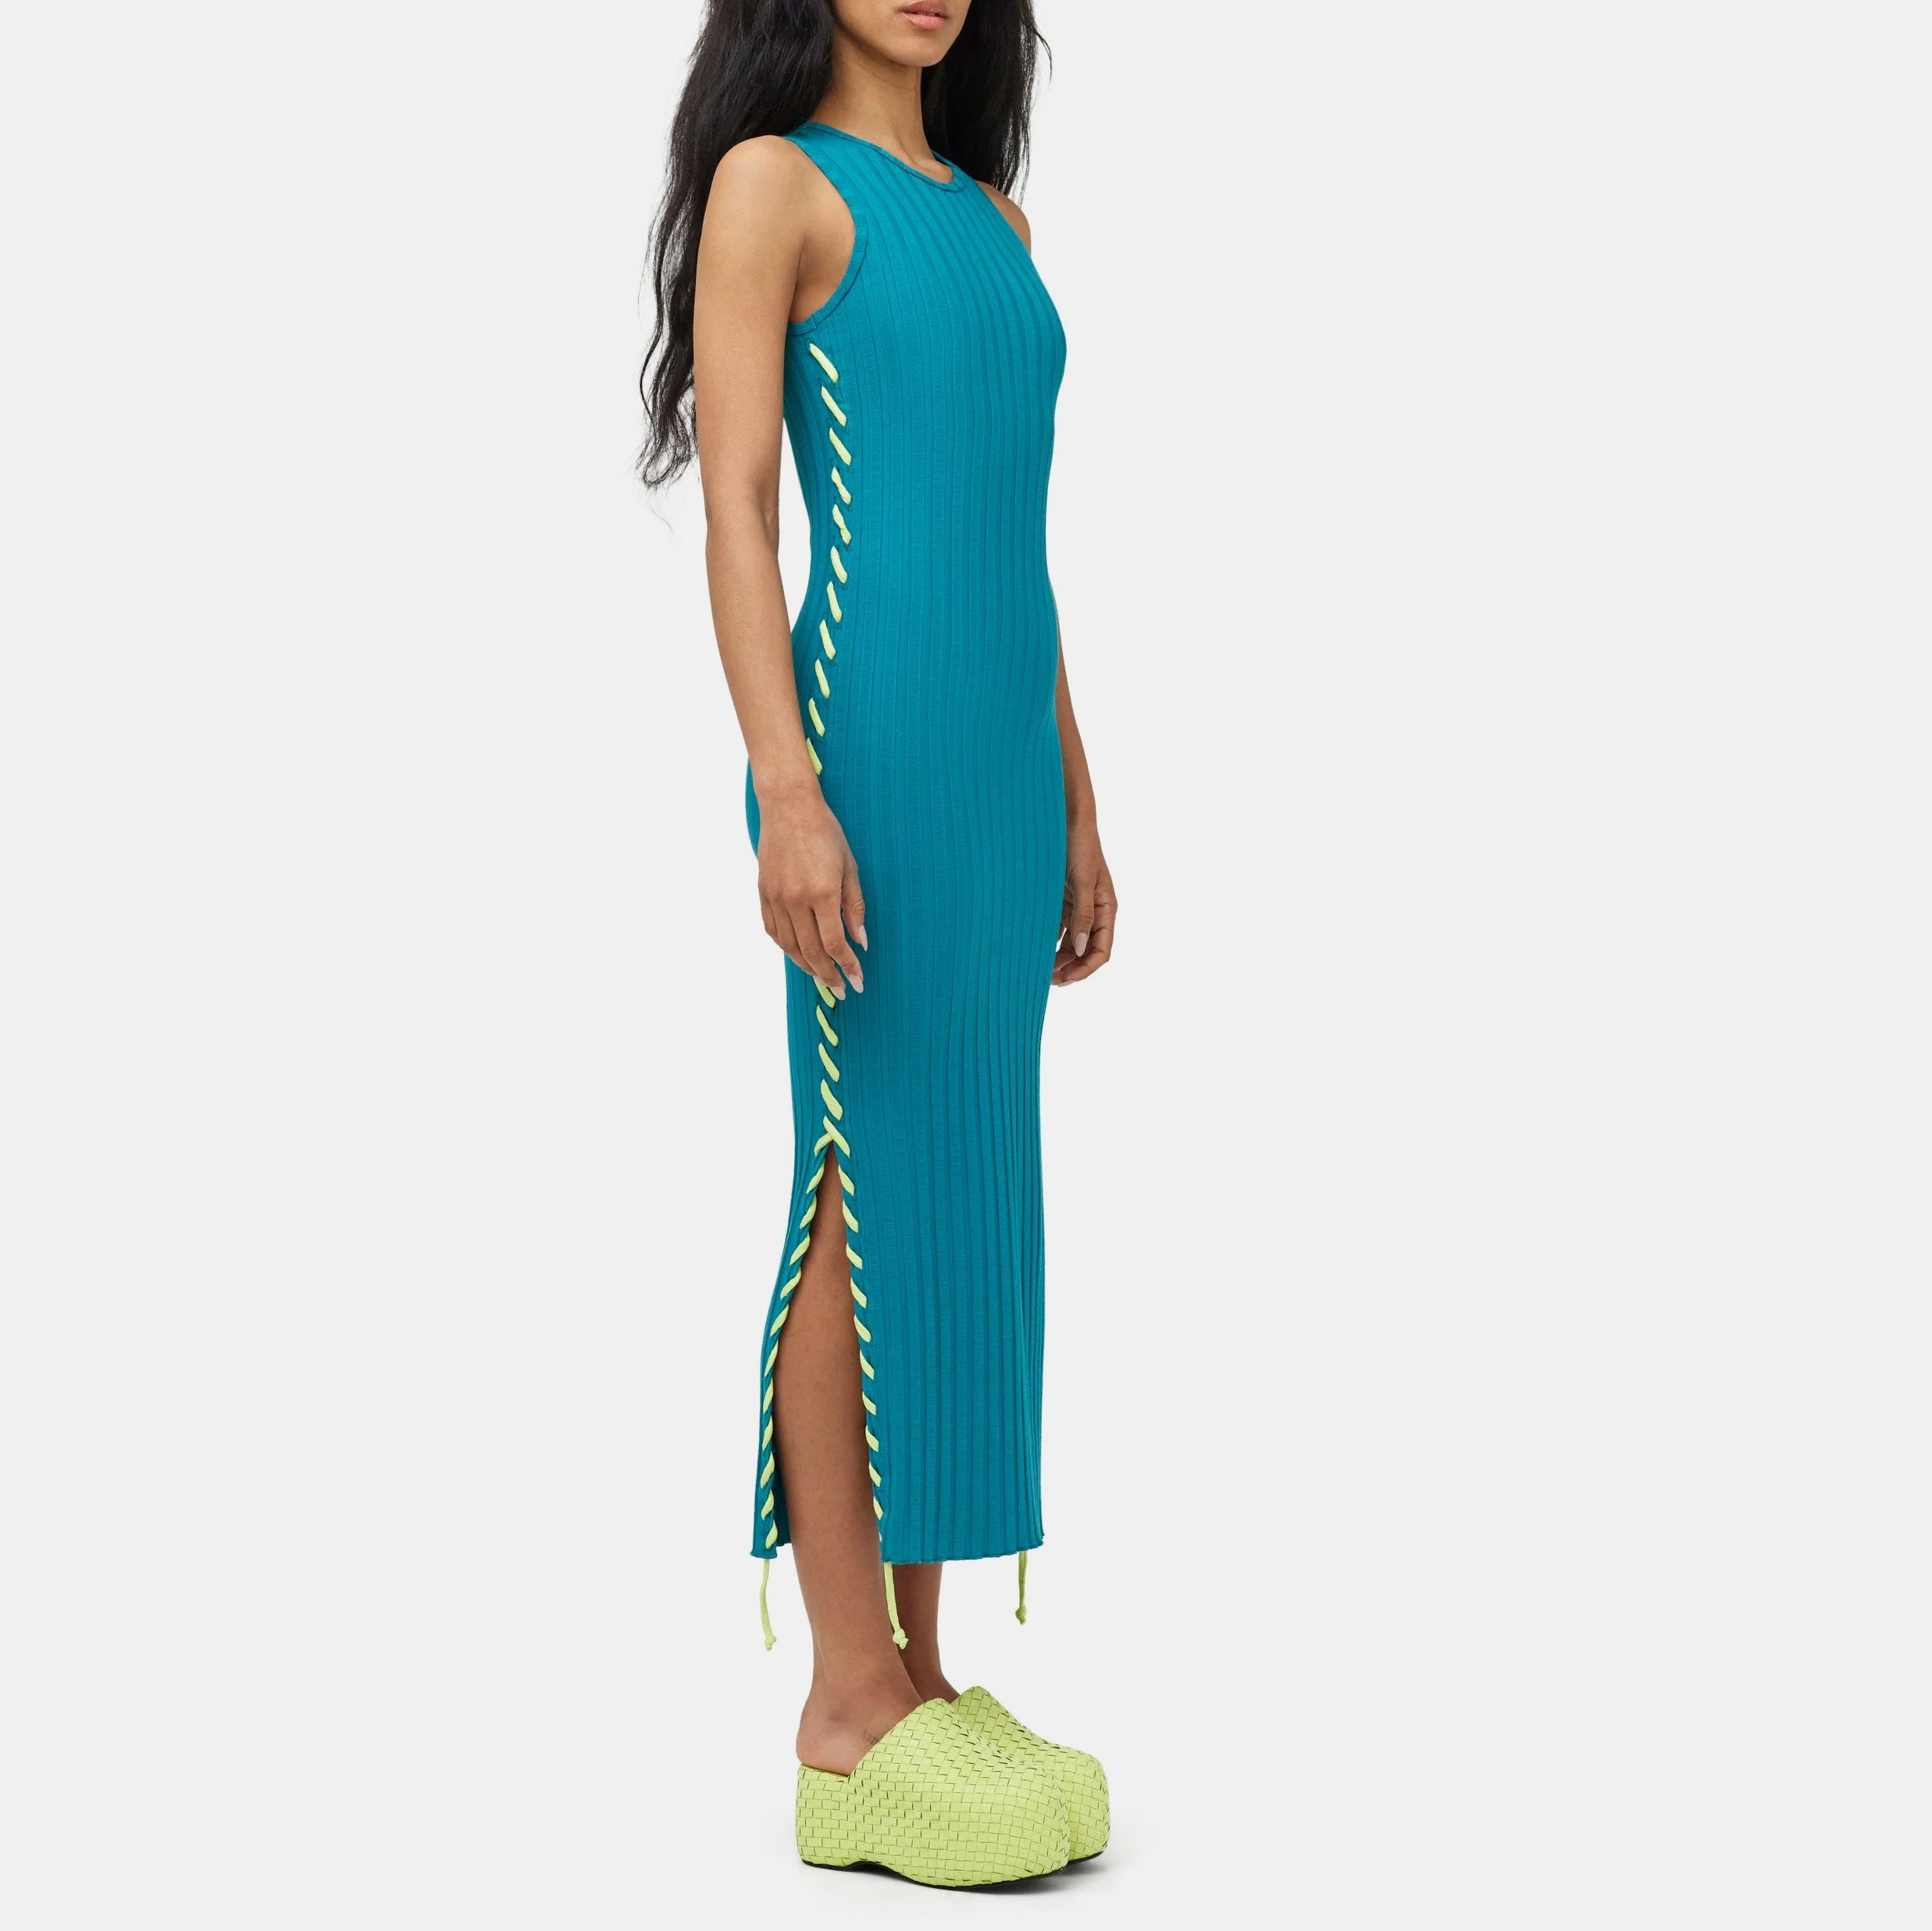 Full body photo of model wearing the teal green ribbed Blix Dress, a sleeveless ribbed dress with fluorescent green oversized stitching detail along the sides.